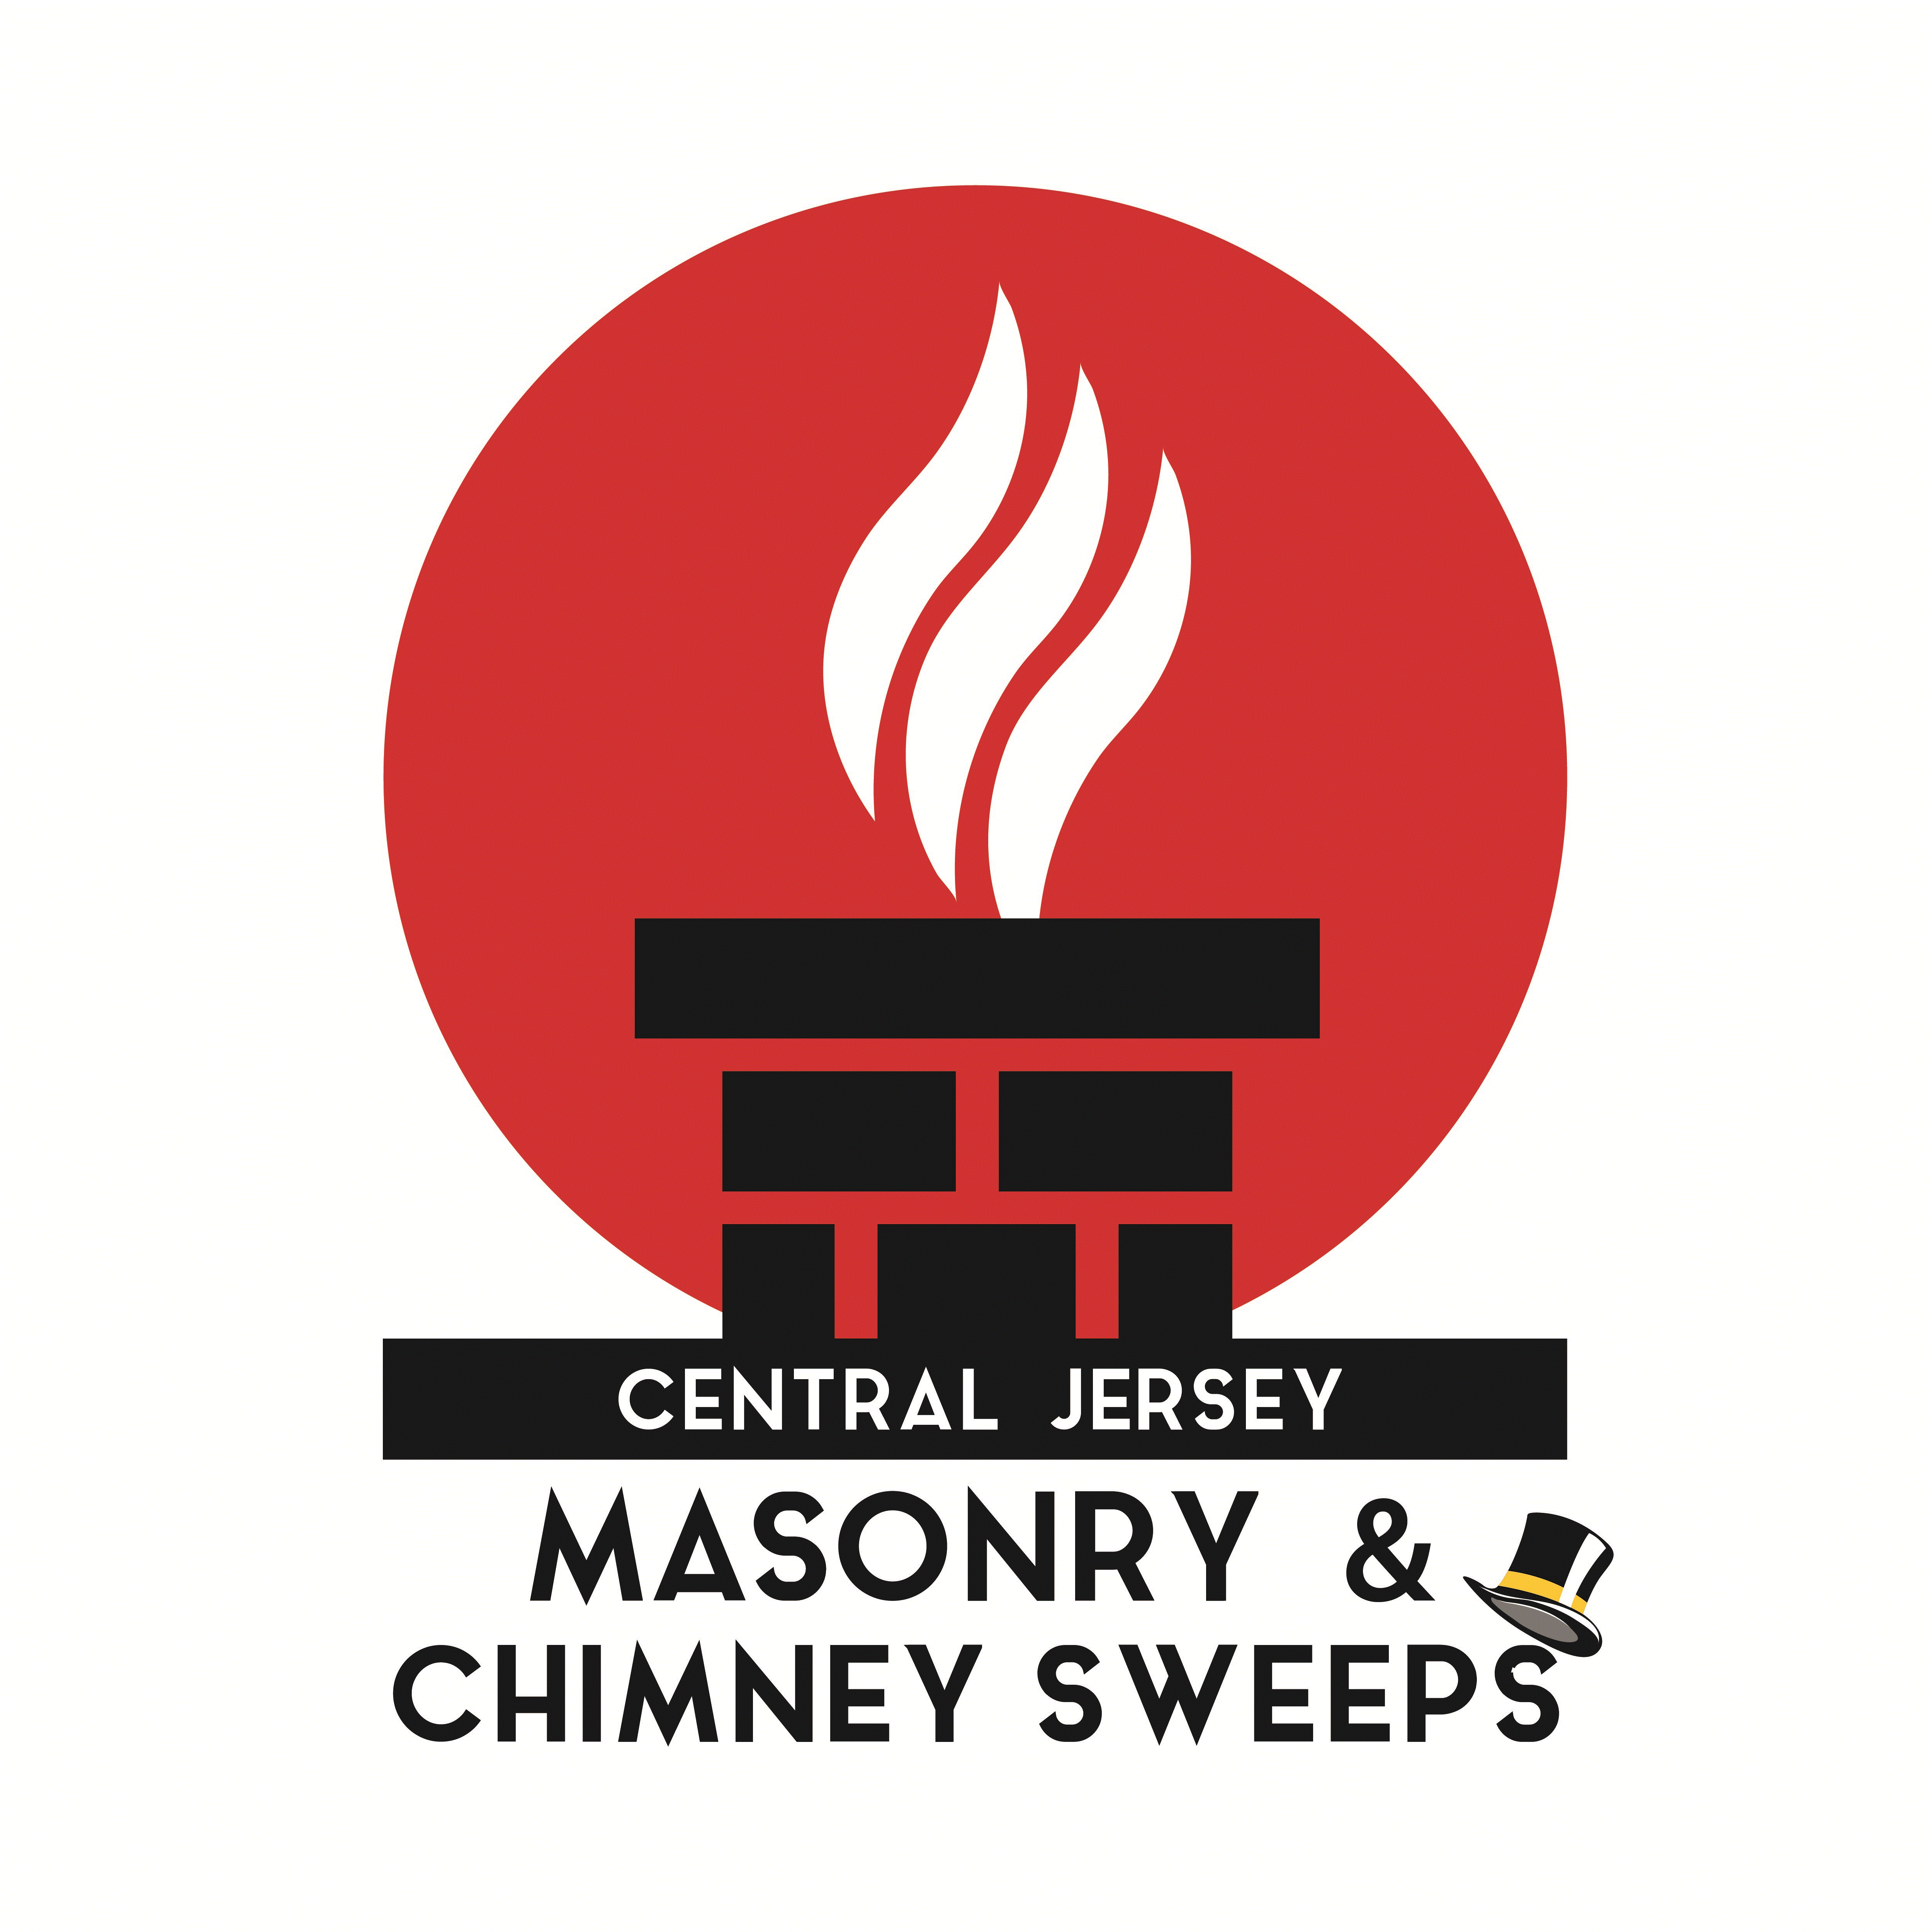 Central Jersey Masonry & Chimney Sweeps (Div. of Hearth Services Unlimited Inc) - Howell, NJ 07731 - (732)577-1100 | ShowMeLocal.com